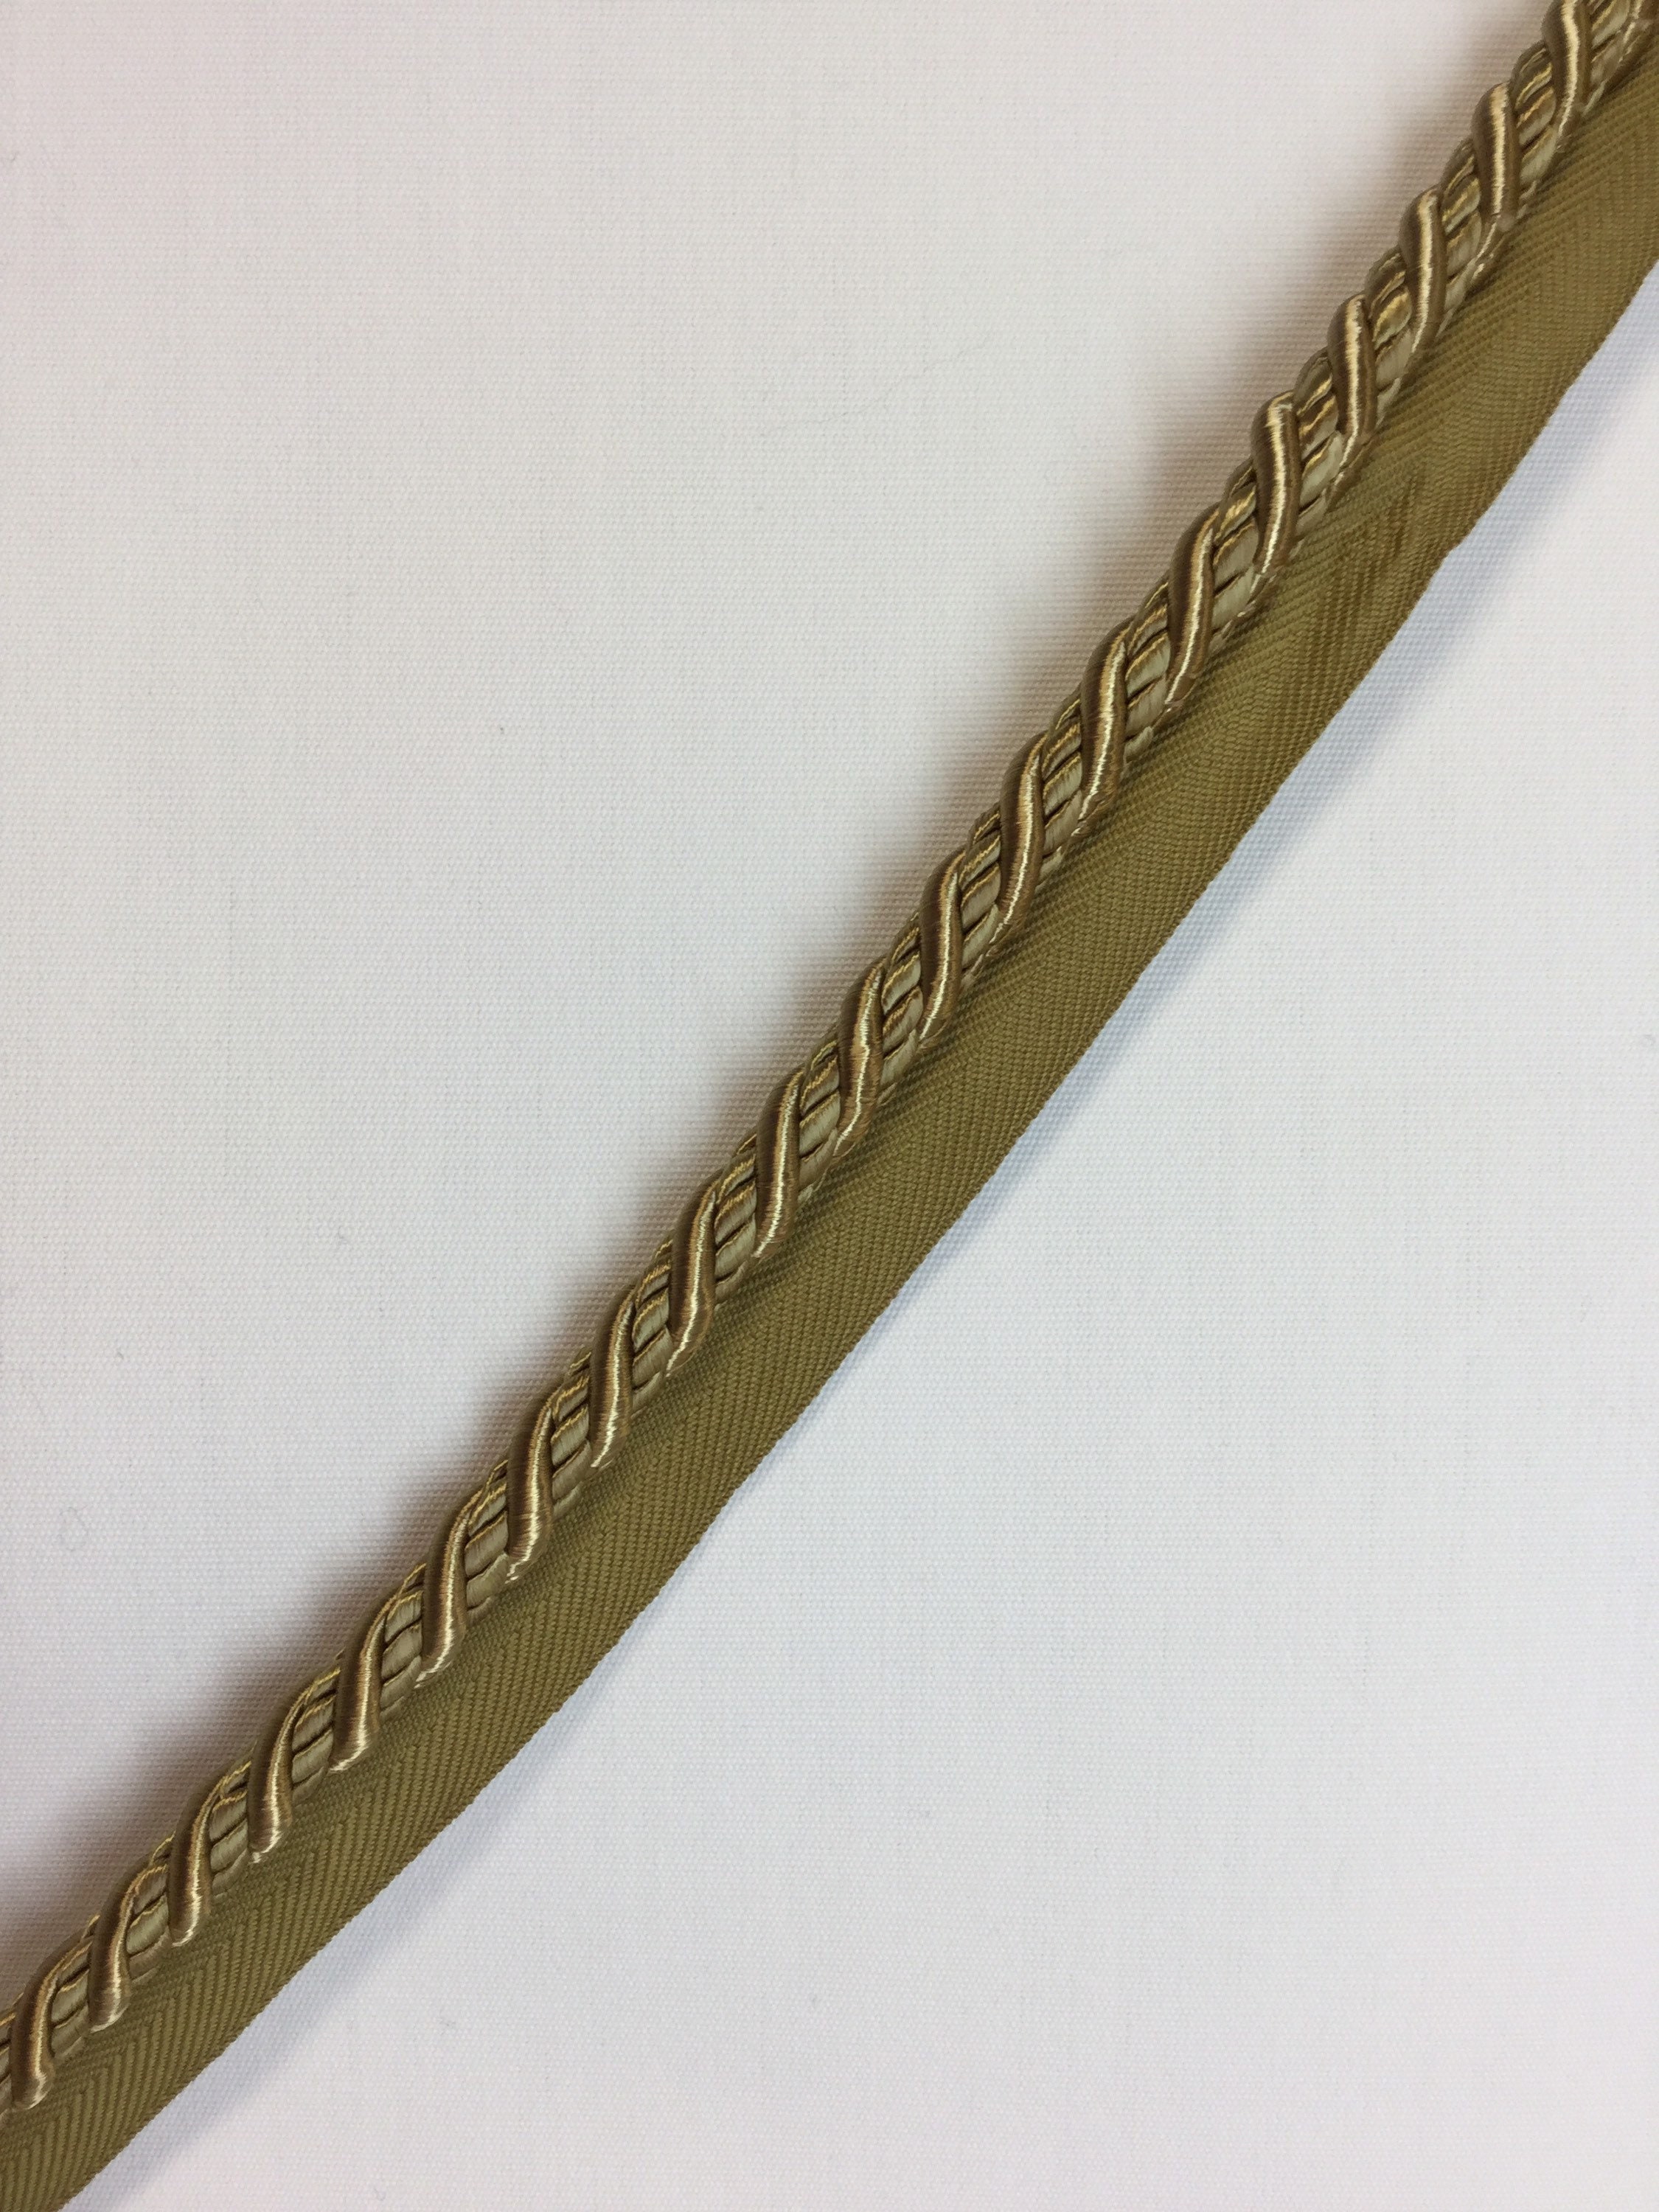 Buy Satin Gold Cord Trim With Lip Twisted Rope Design for Edge Online in  India 